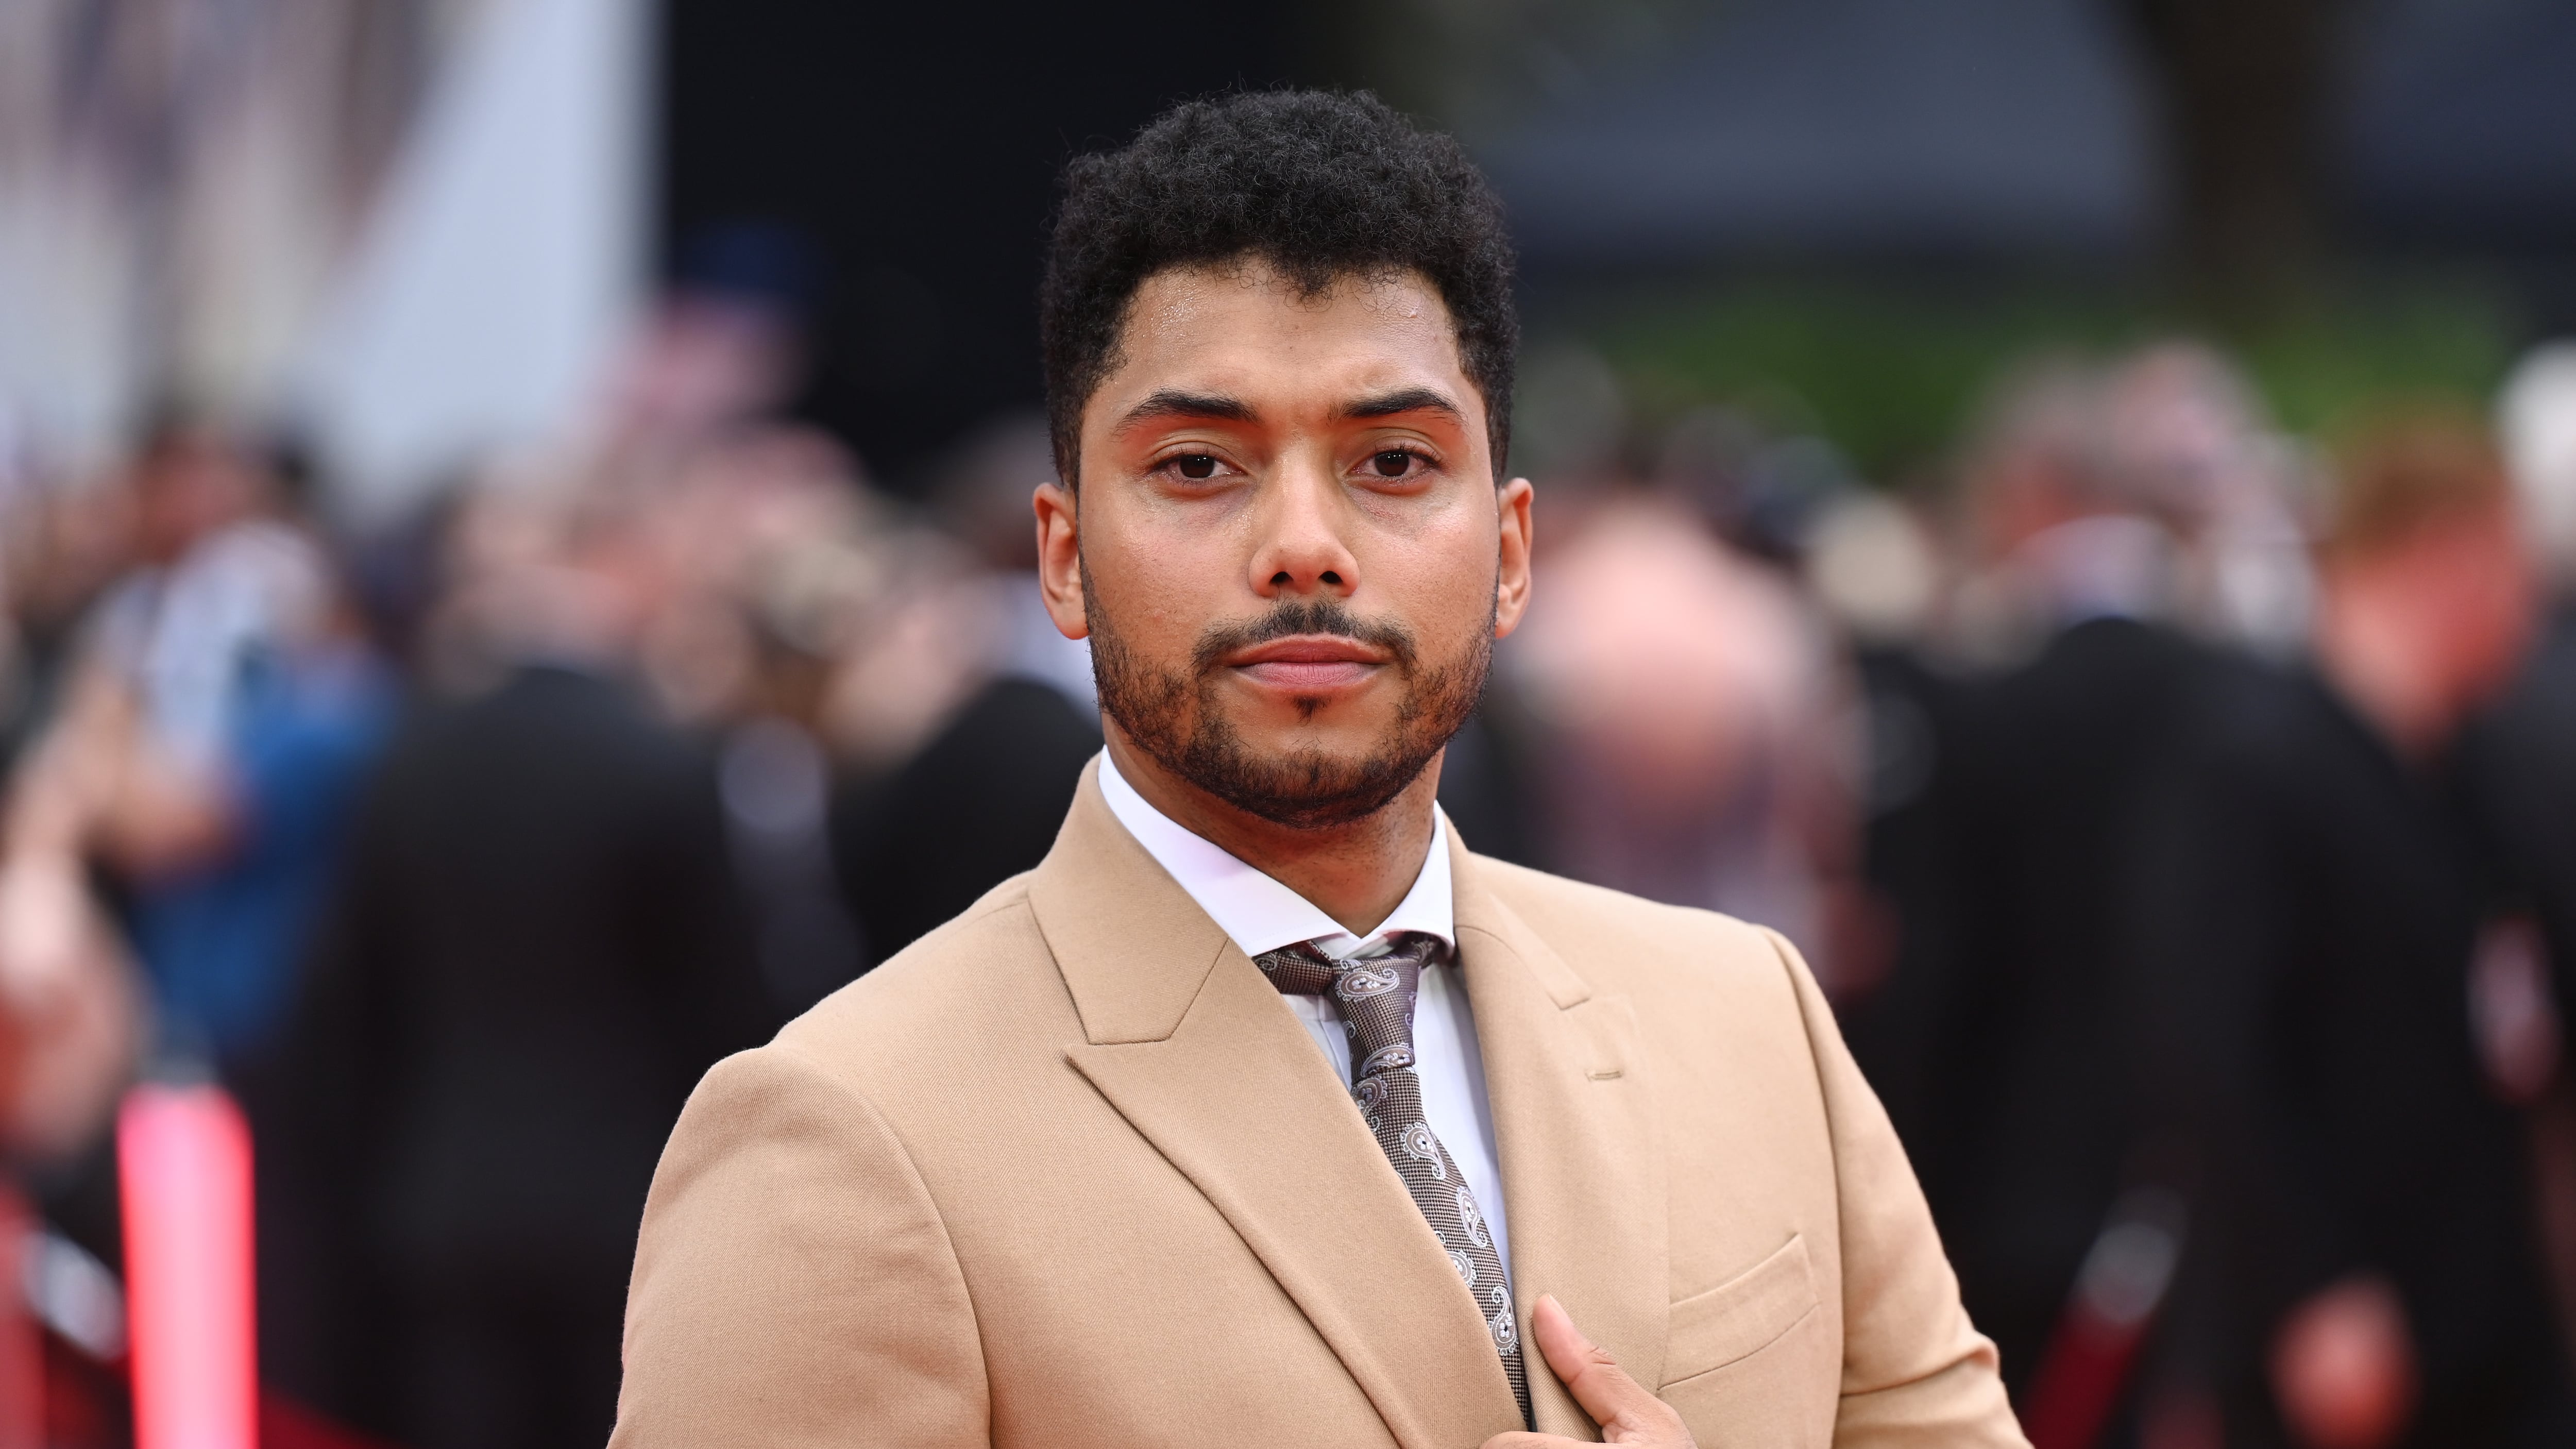 Chance Perdomo|Getty Images